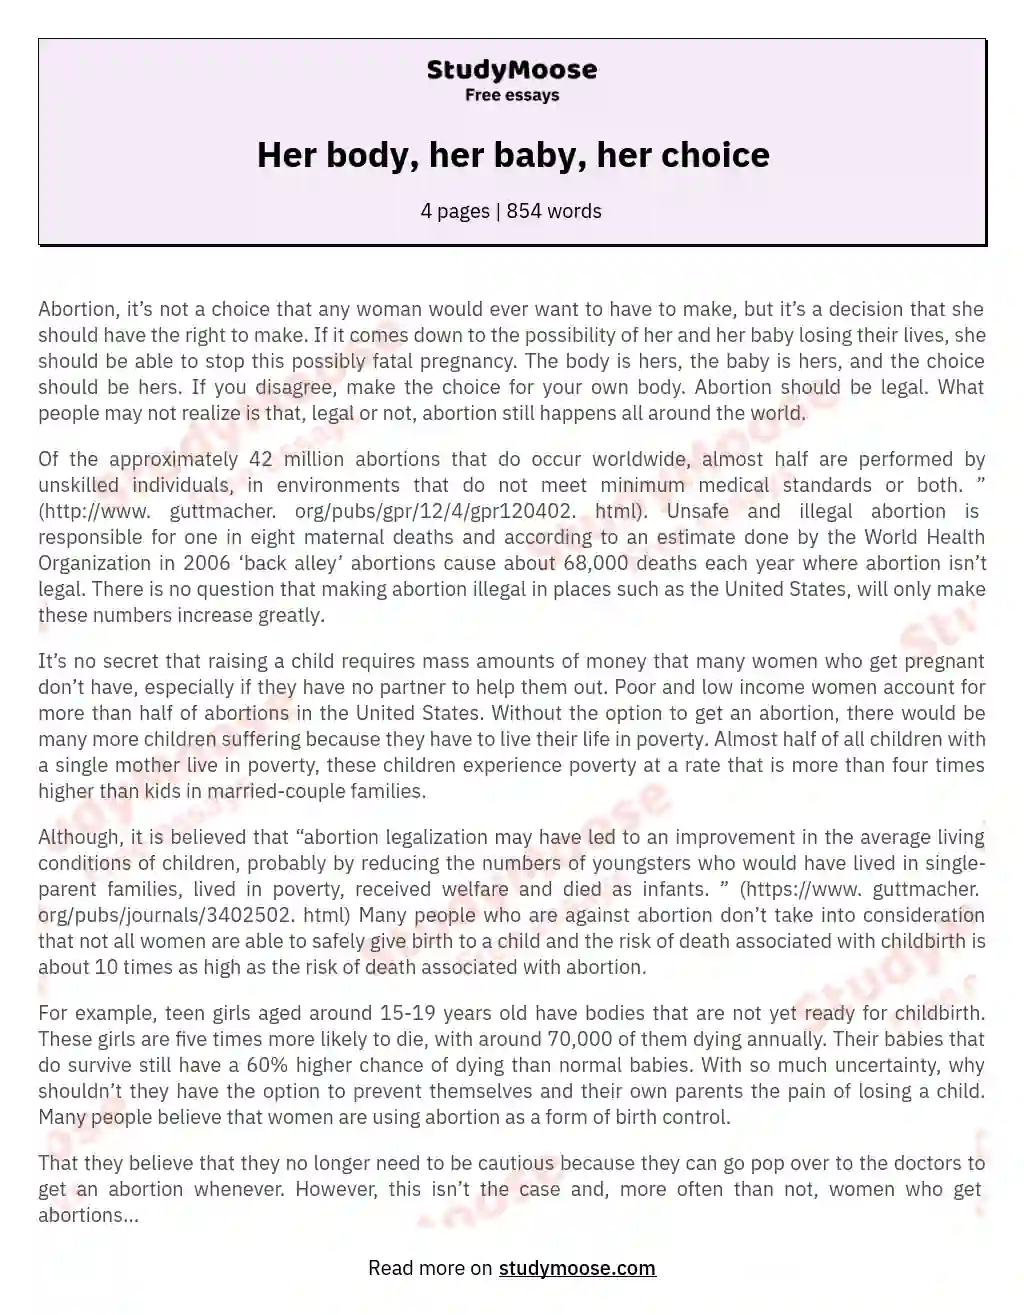 Her body, her baby, her choice